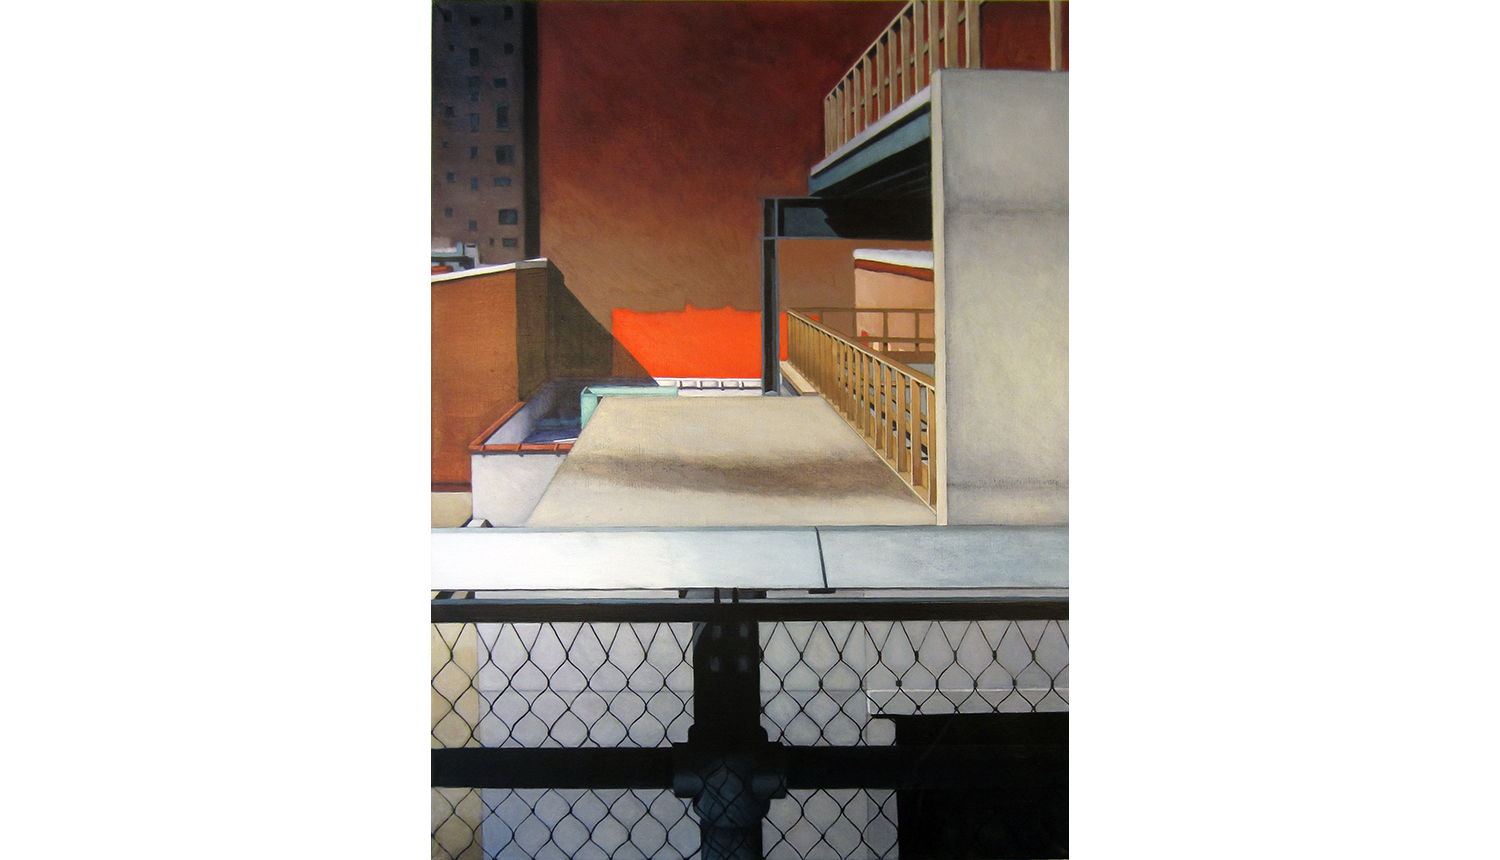   High Line (View Four),  2011, Acrylic on linen, 30 x 40” 